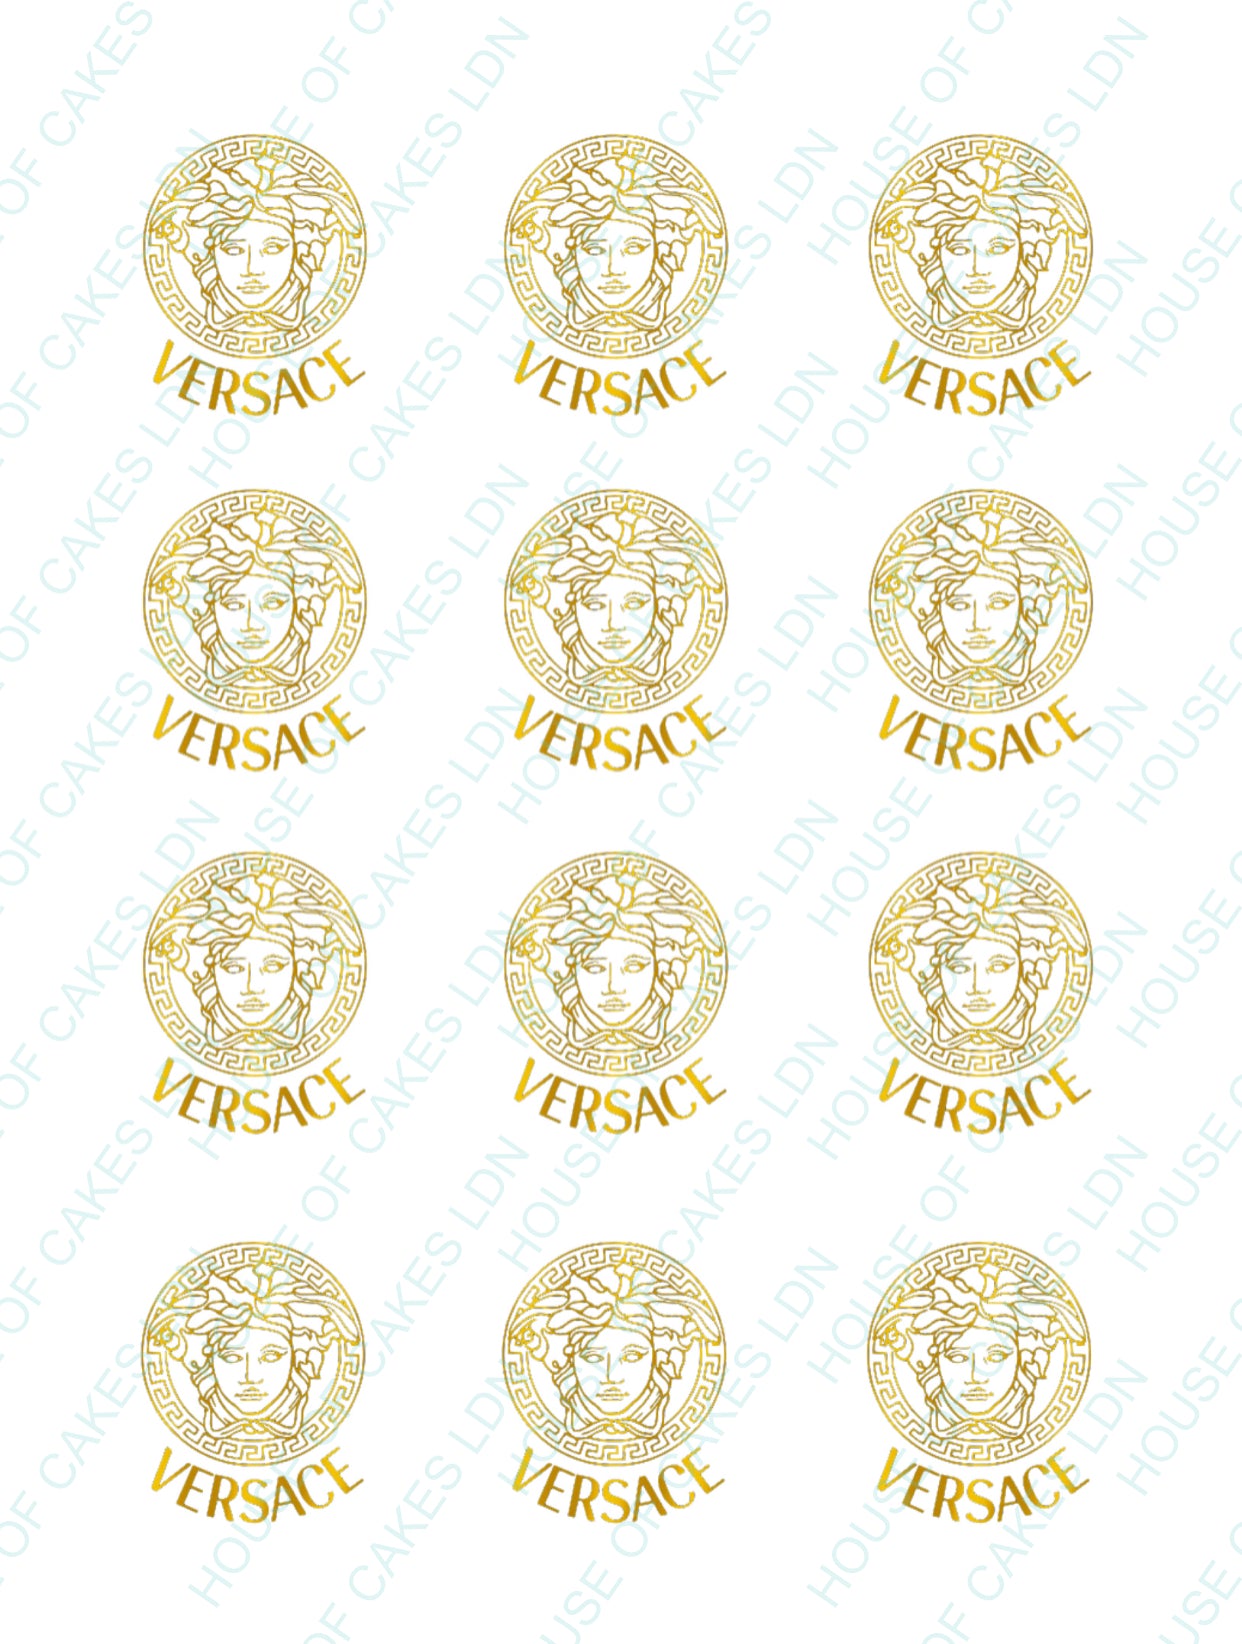 12 PRE CUT Edible Icing Versace Inspired Cupcake Toppers